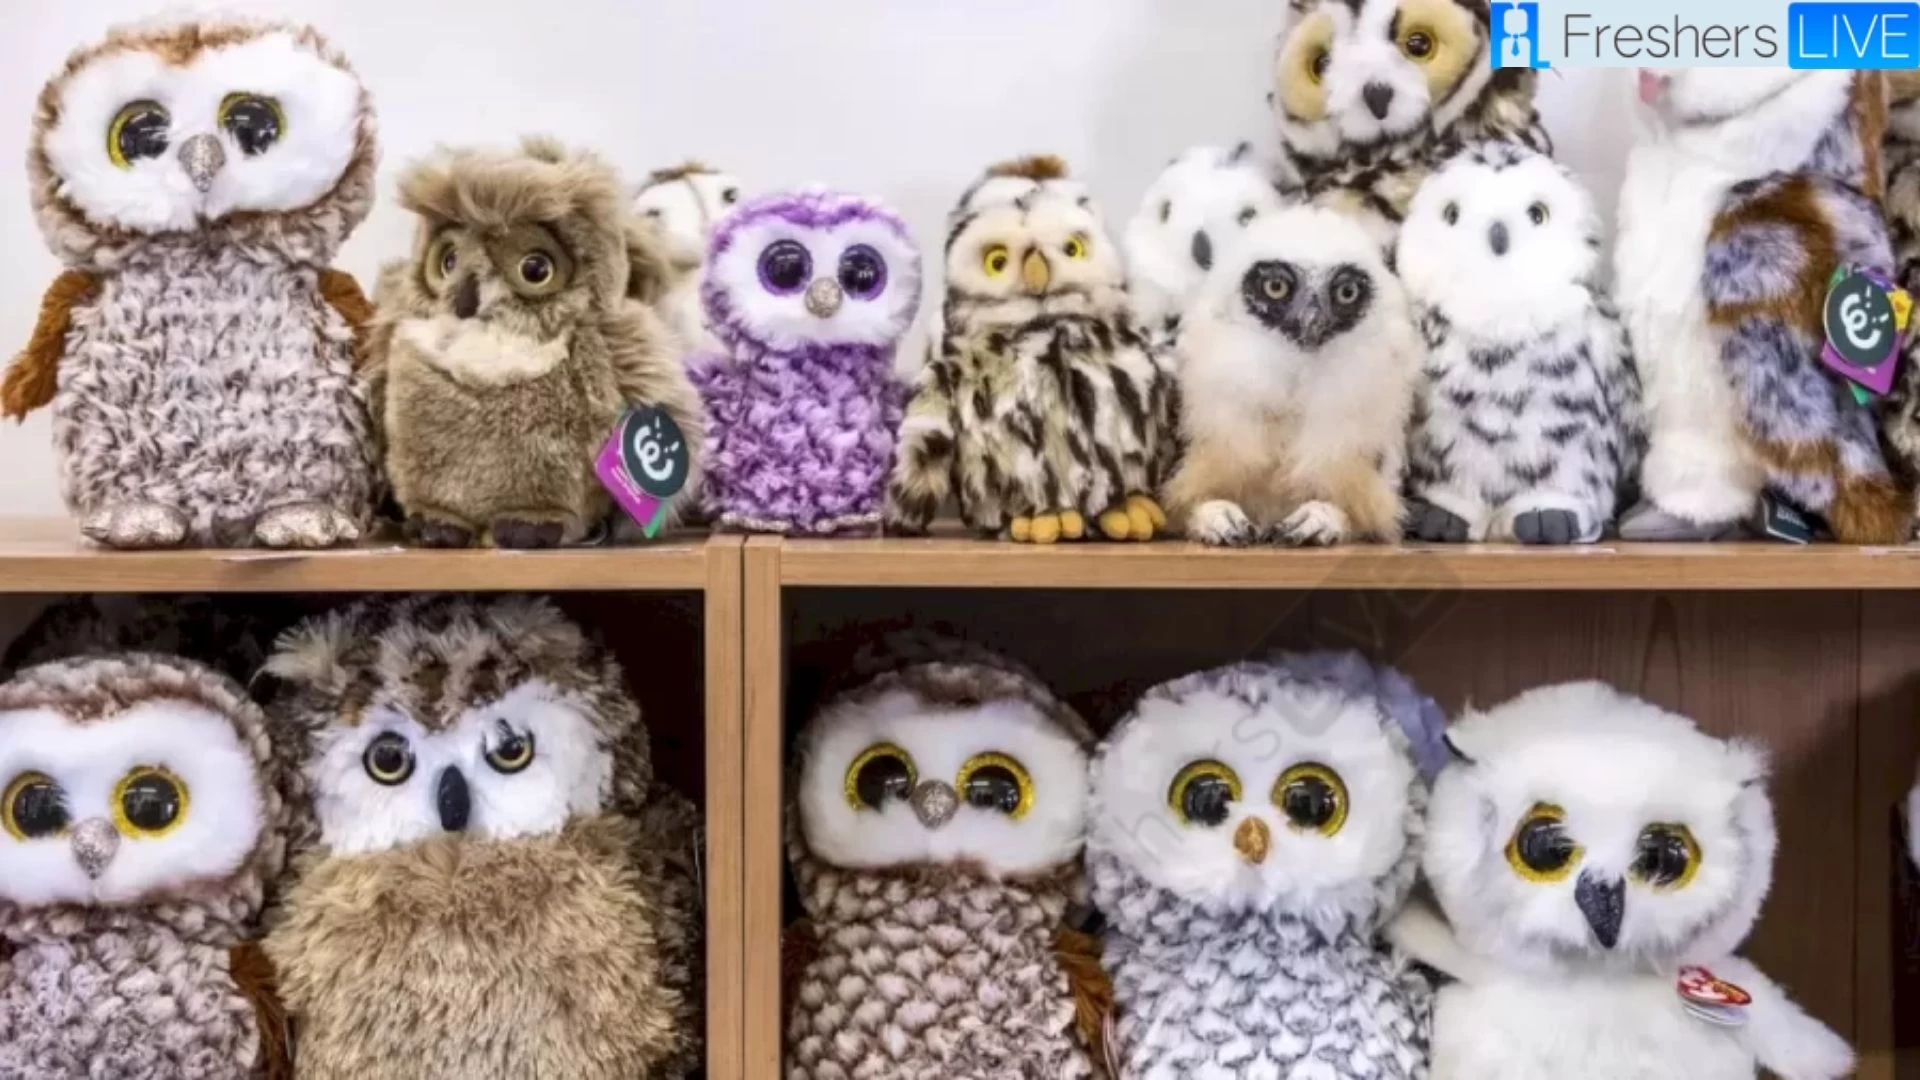 Only The Sharpest Eyes Can Spot The Real Owl In 10 Secs